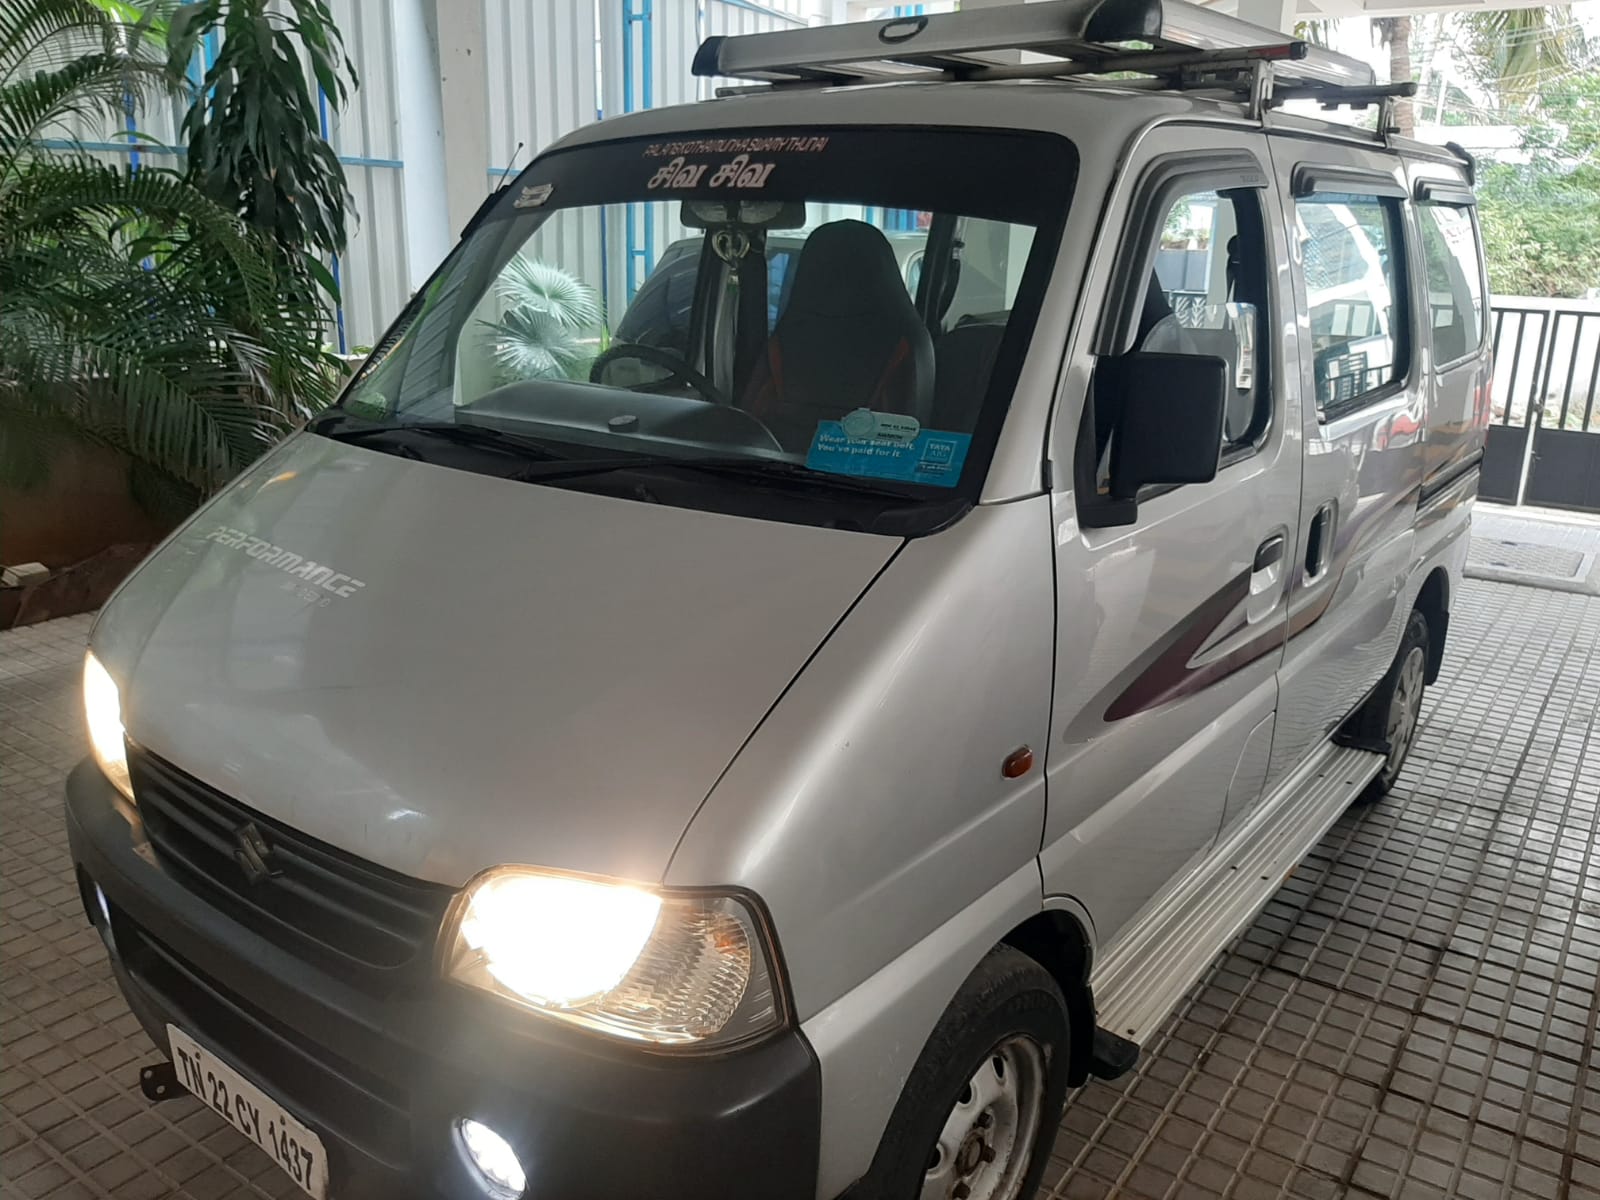 3734-for-sale-Maruthi-Suzuki-Eeco-Petrol-Second-Owner-2011-TN-registered-rs-254000